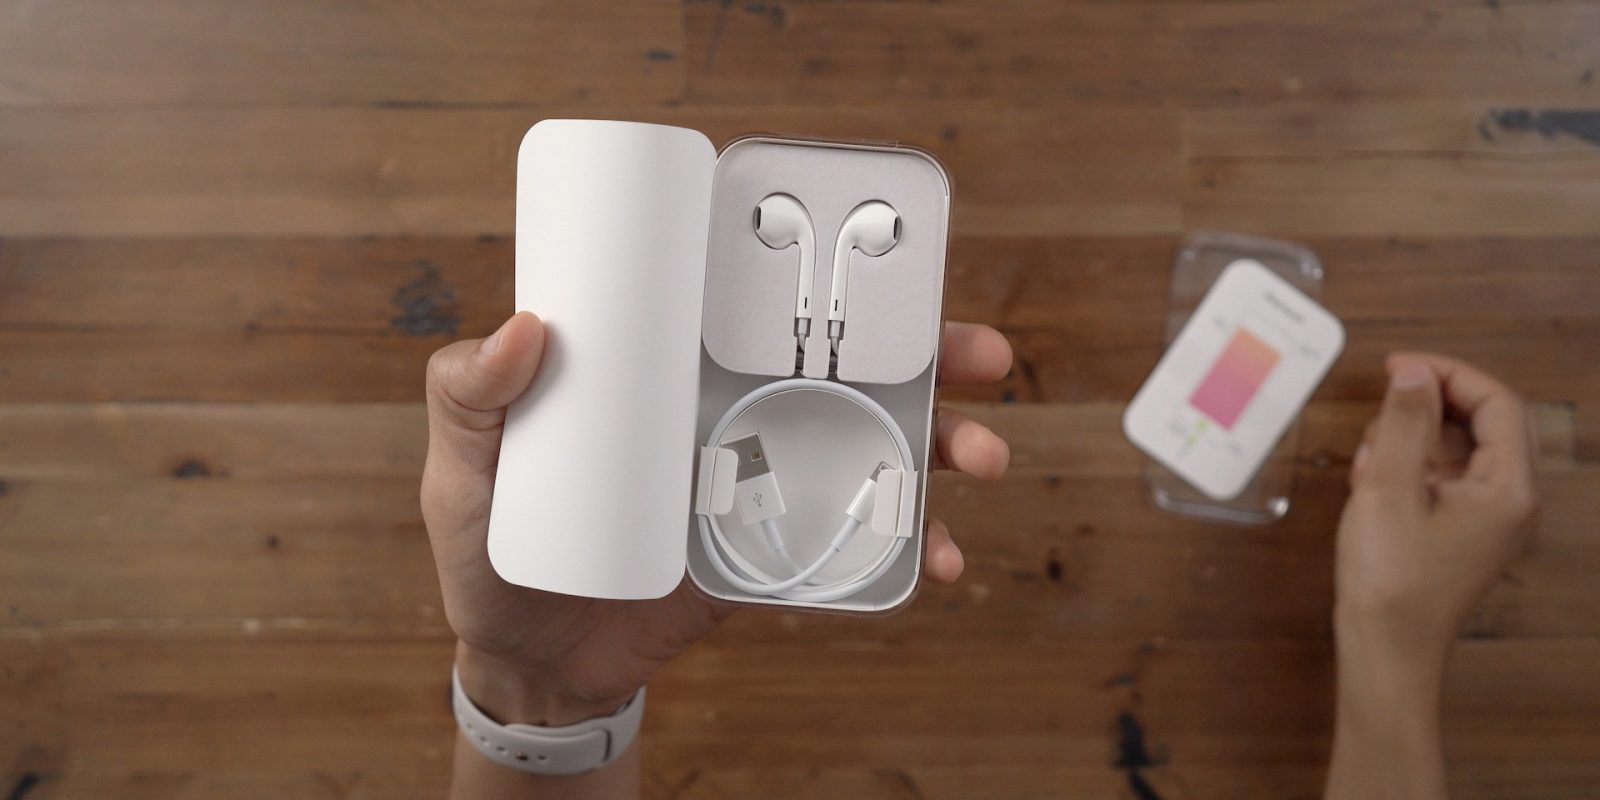 Kuo: iPhone 12 buyers won't be getting free earphones in the box